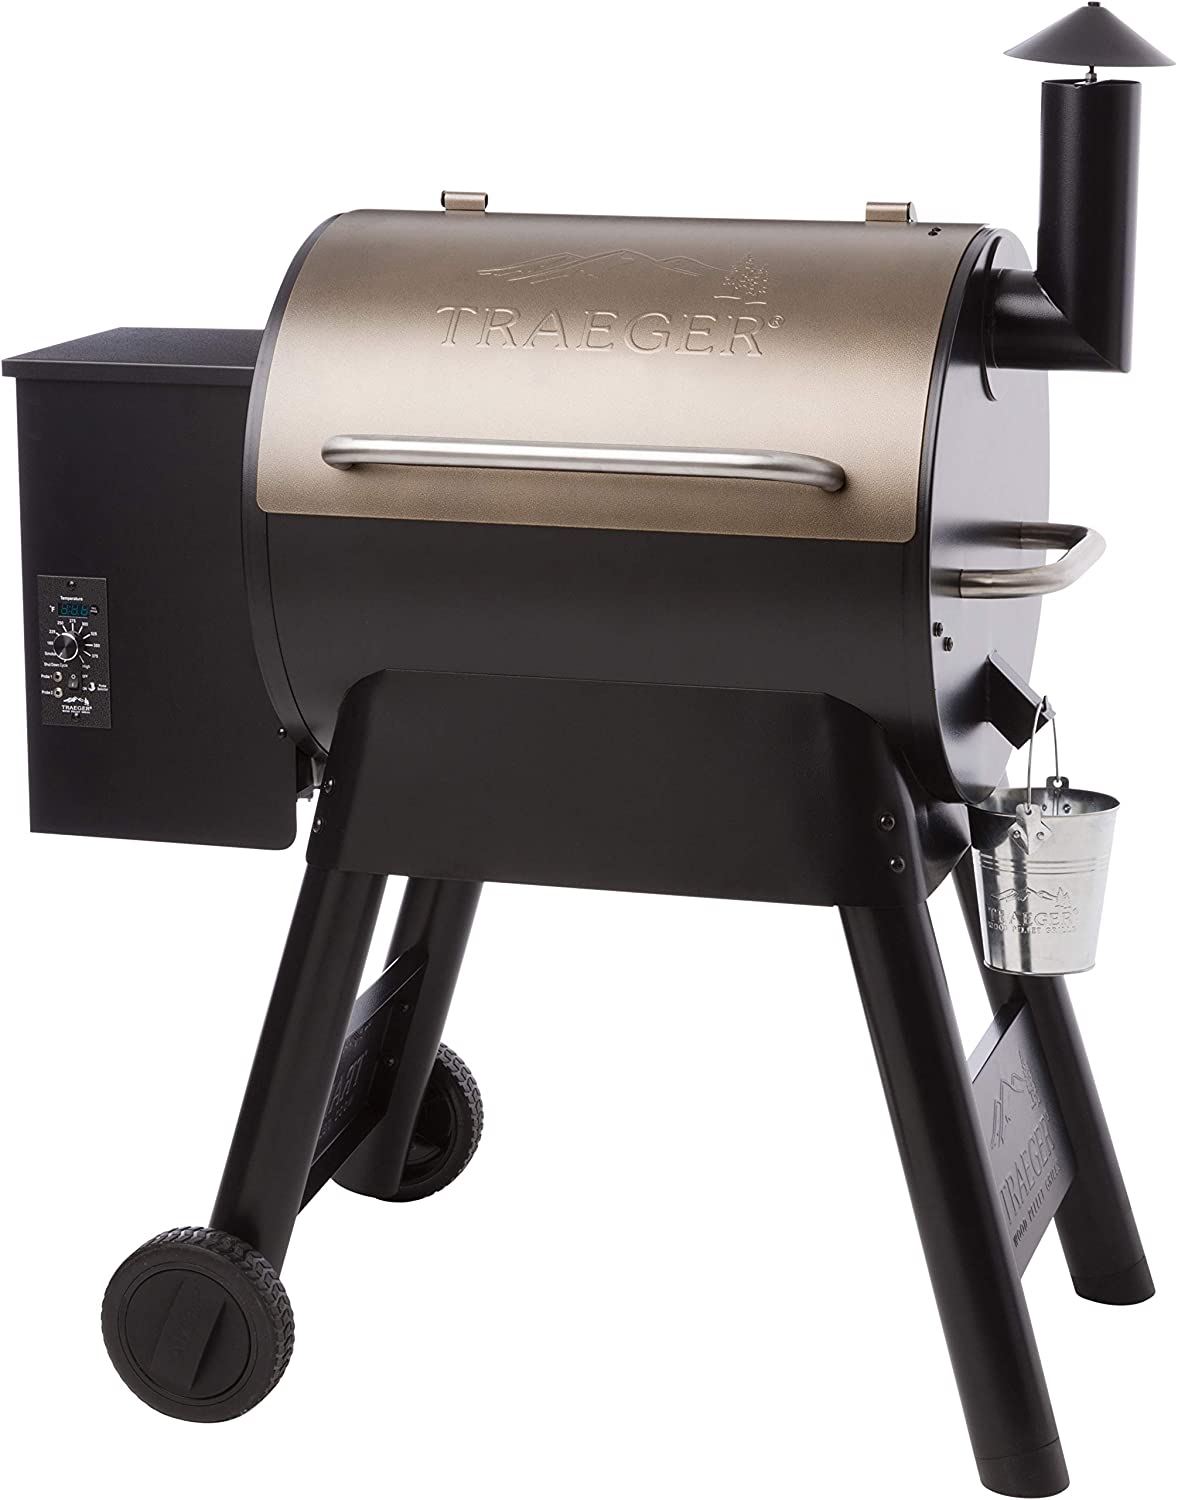 Traeger Pro Series 22 Wheeled 6-In-1 Pellet Grill